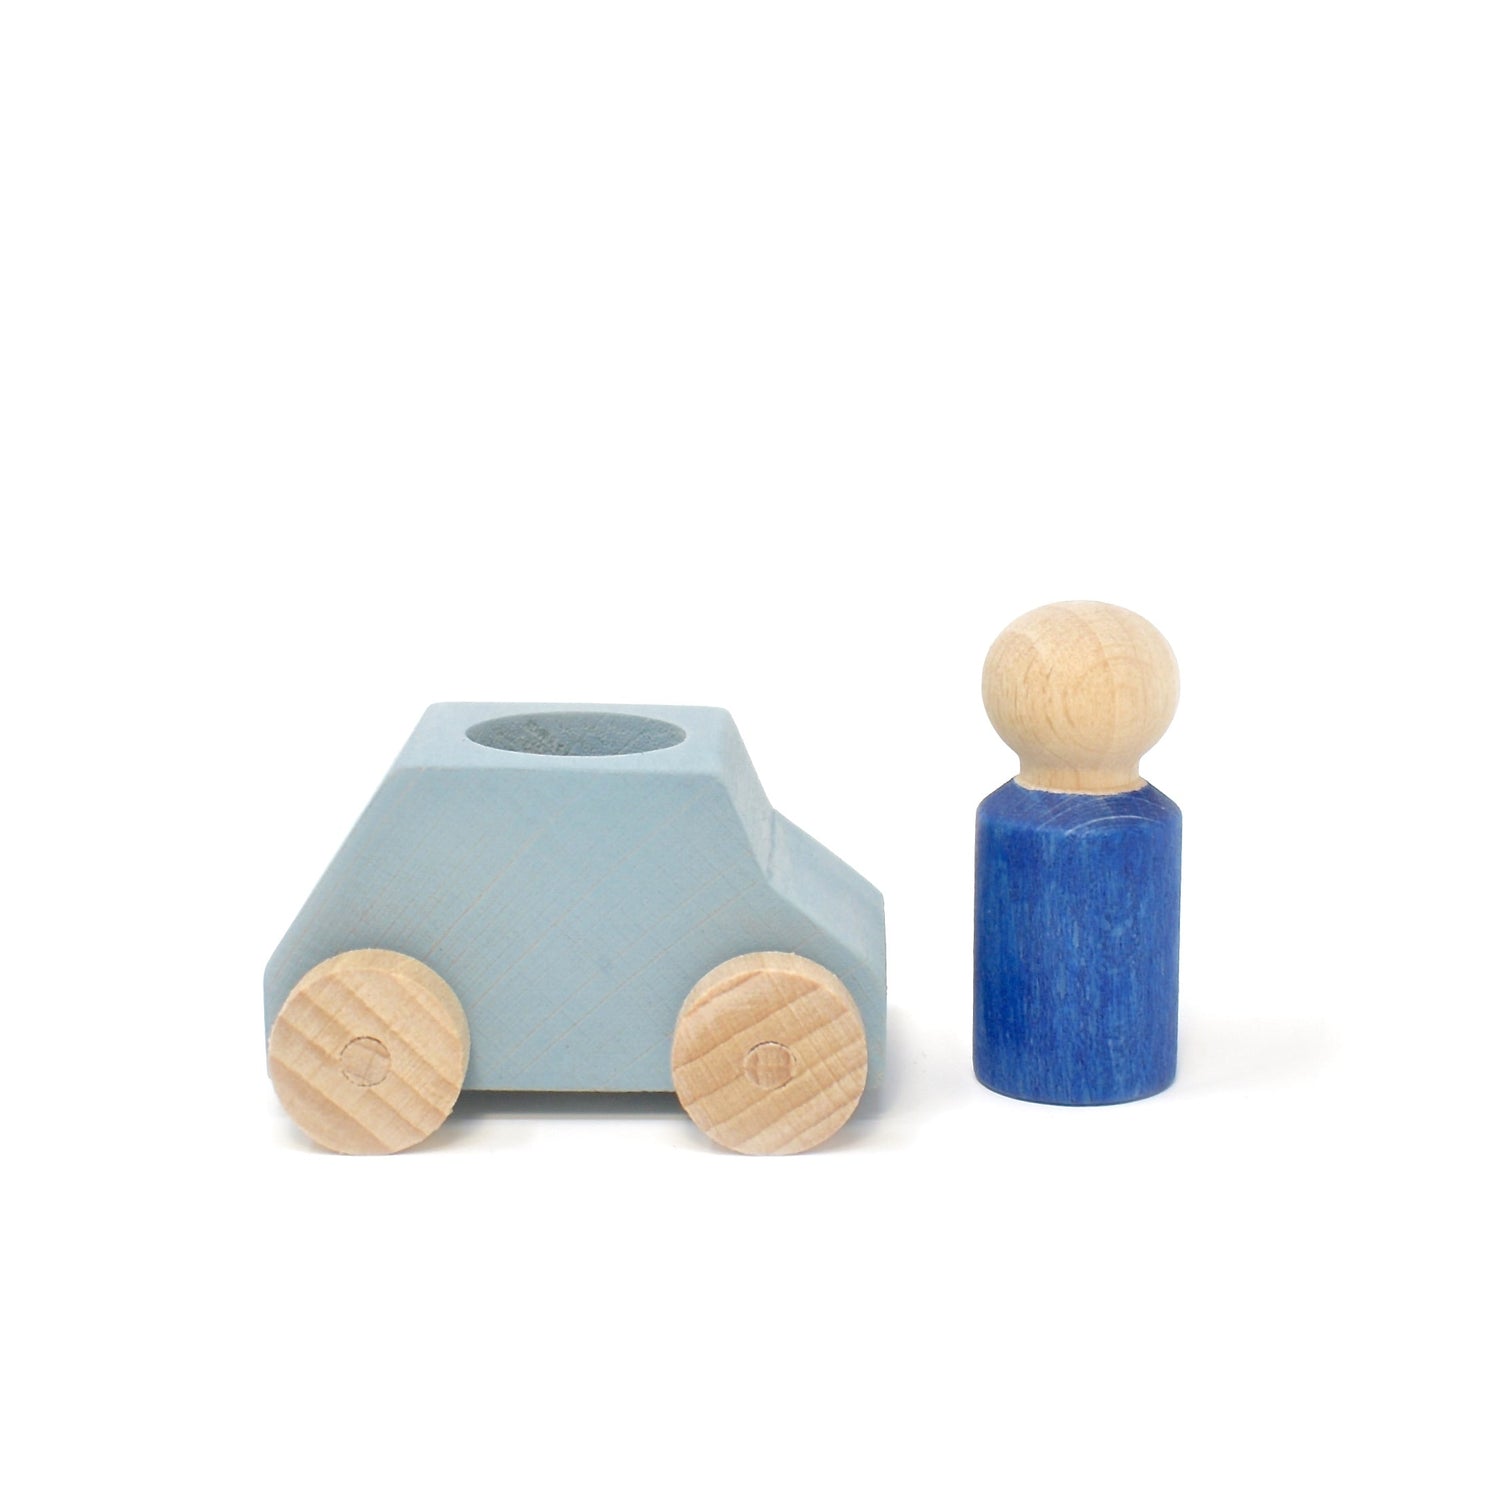 LUBULONA CAR Grey with Blue Figure by LUBULONA - The Playful Collective